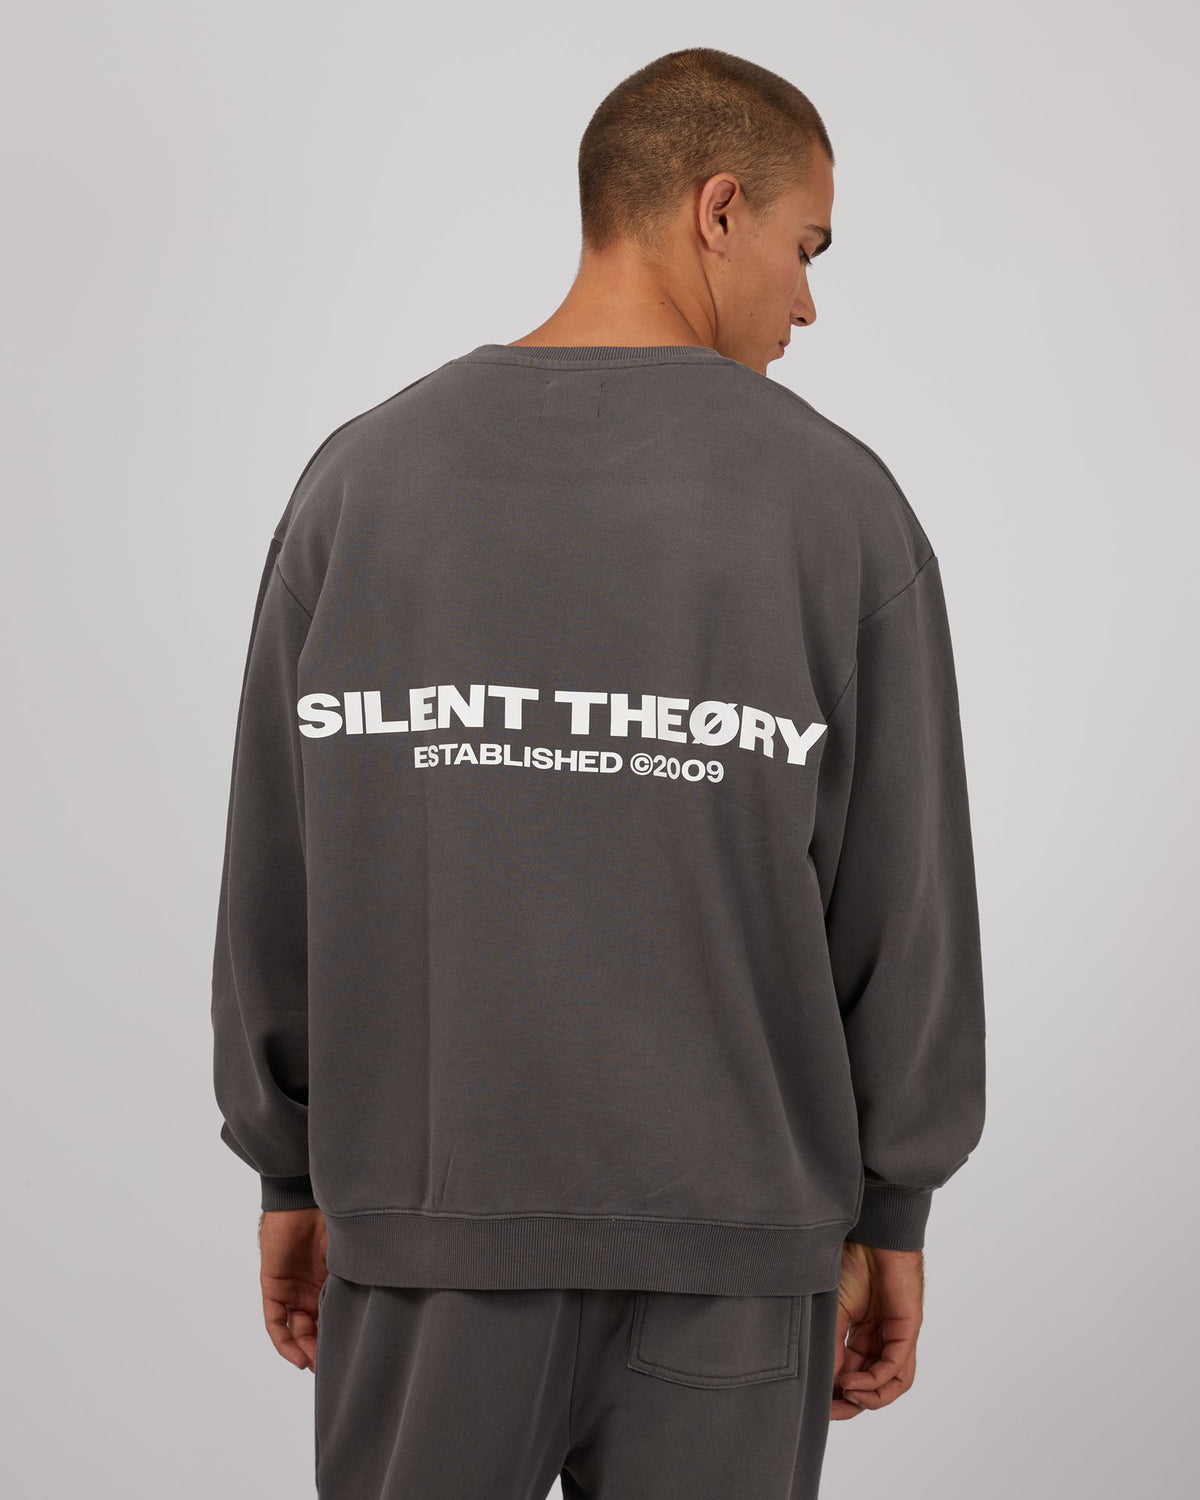 Silent Theory-Essential Theory Crew Coal-Edge Clothing